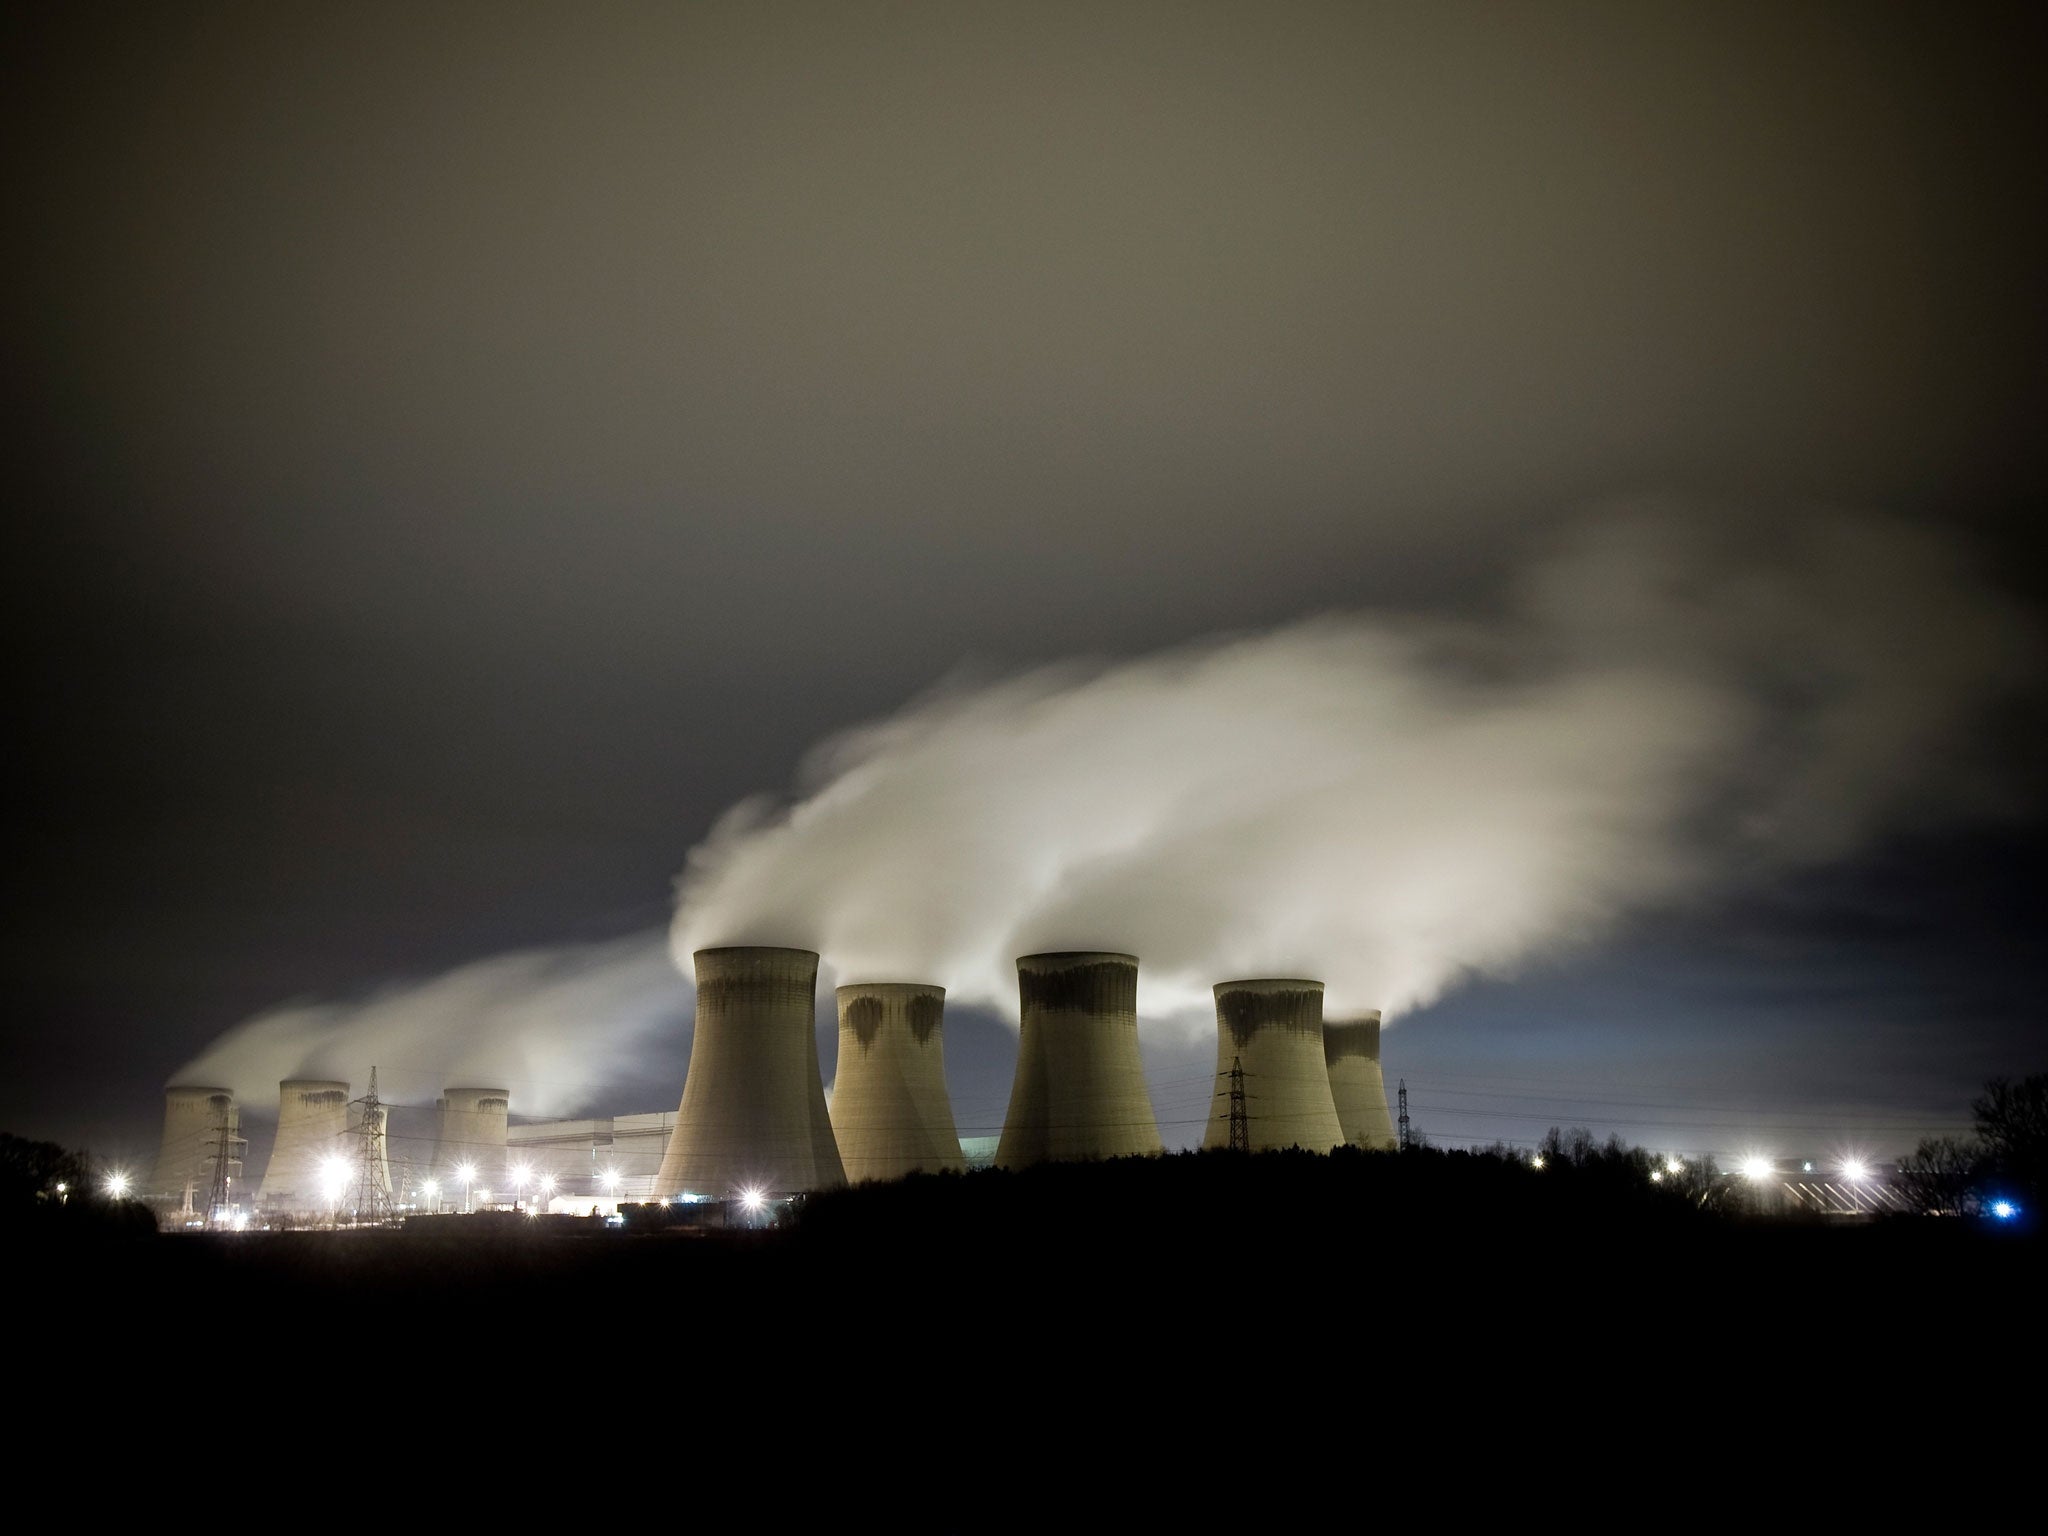 Steam rises from power station cooling towers